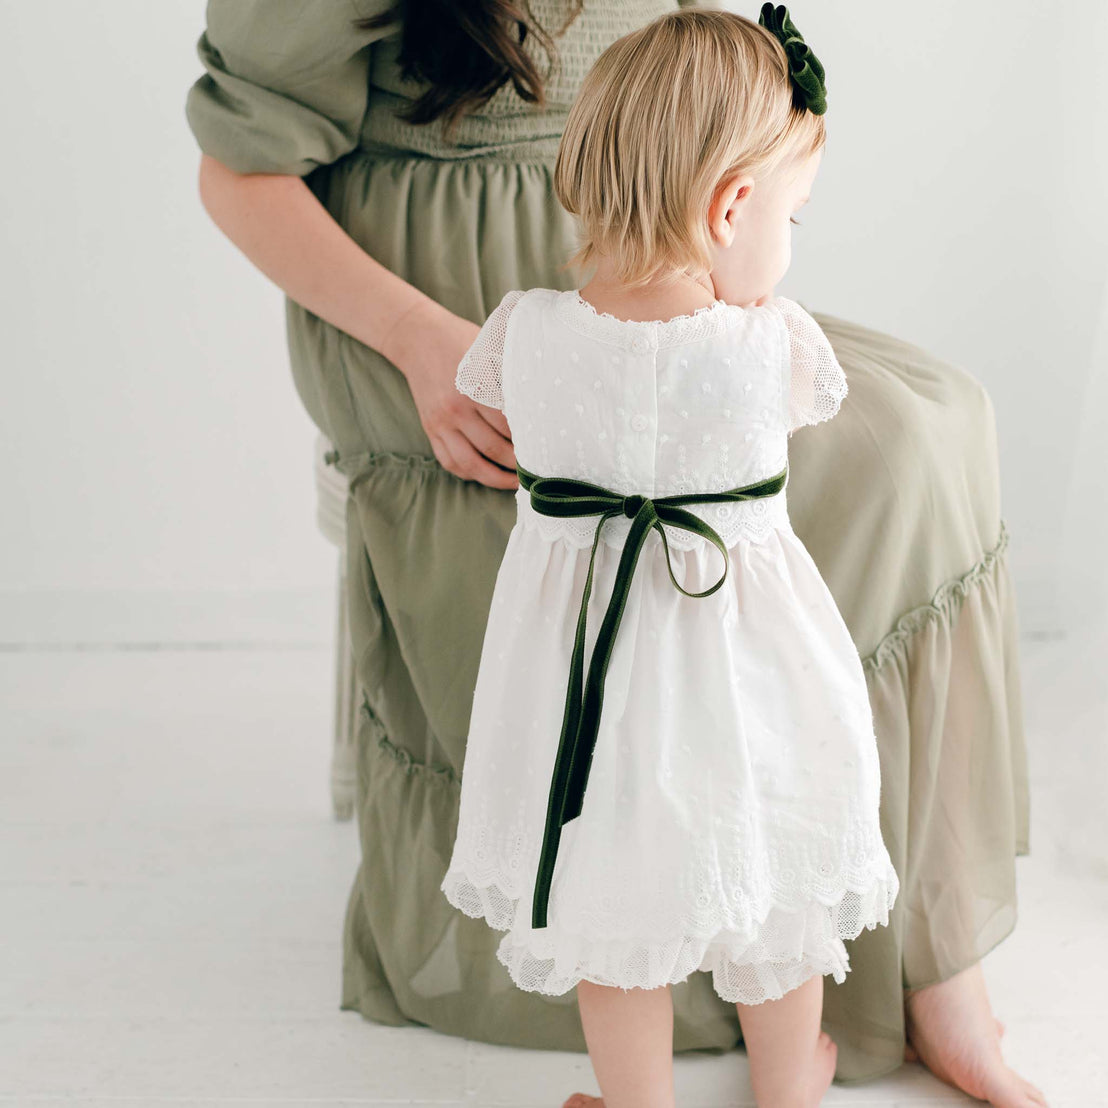 A toddler in the Emily Dress & Bloomers with a Green Sash stands in front of a seated woman, who adjusts the child's dress for a christening. The setting is minimalist with.